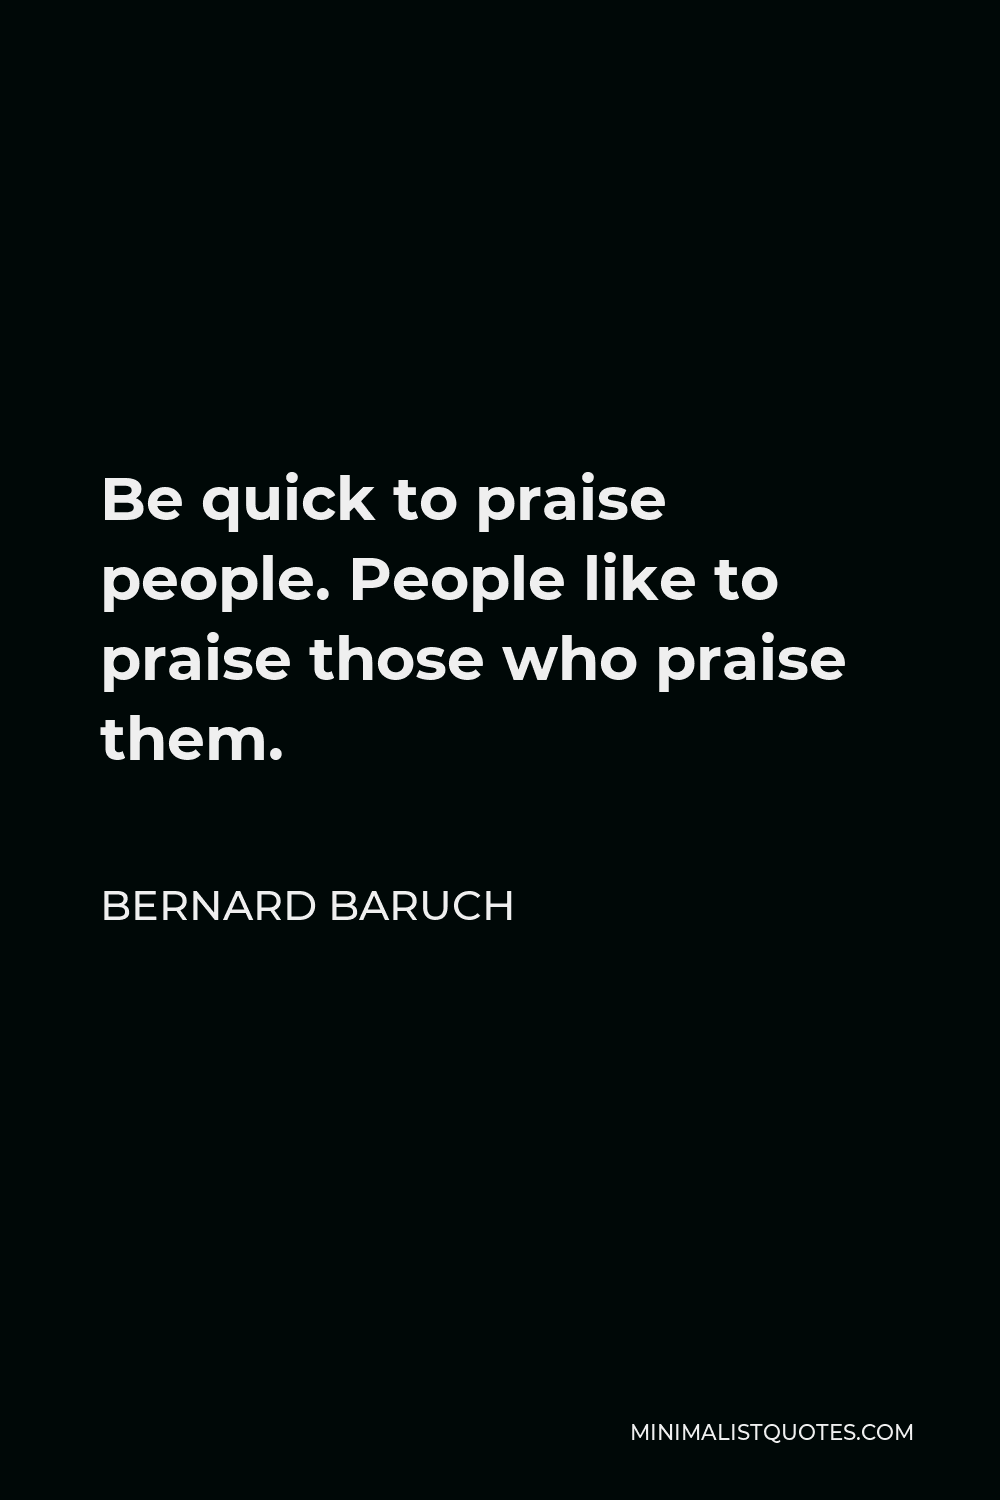 Bernard Baruch Quote - Be quick to praise people. People like to praise those who praise them.